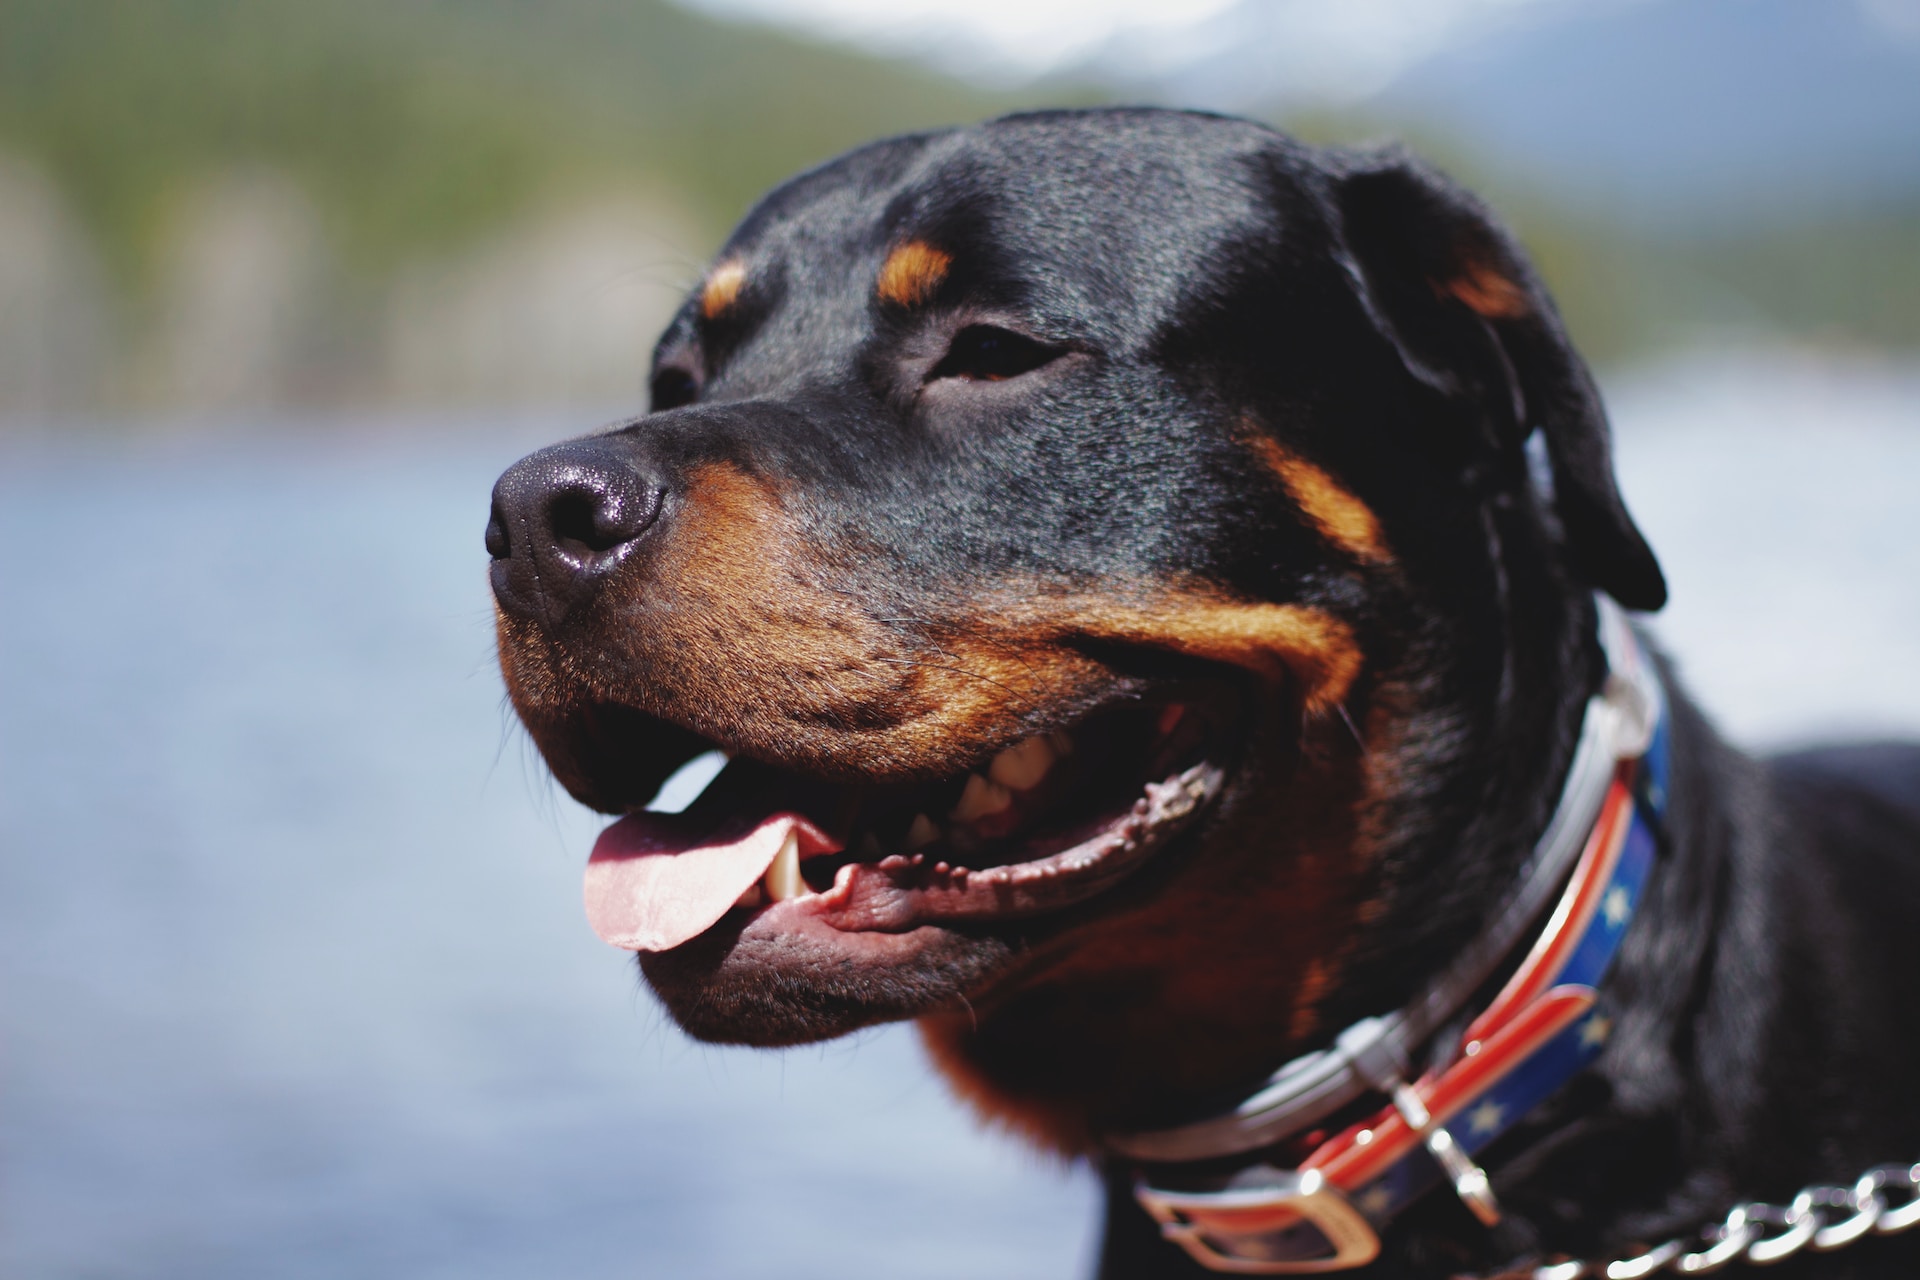 Rottweiler - Energetic Loyal Guard Dog and Companion